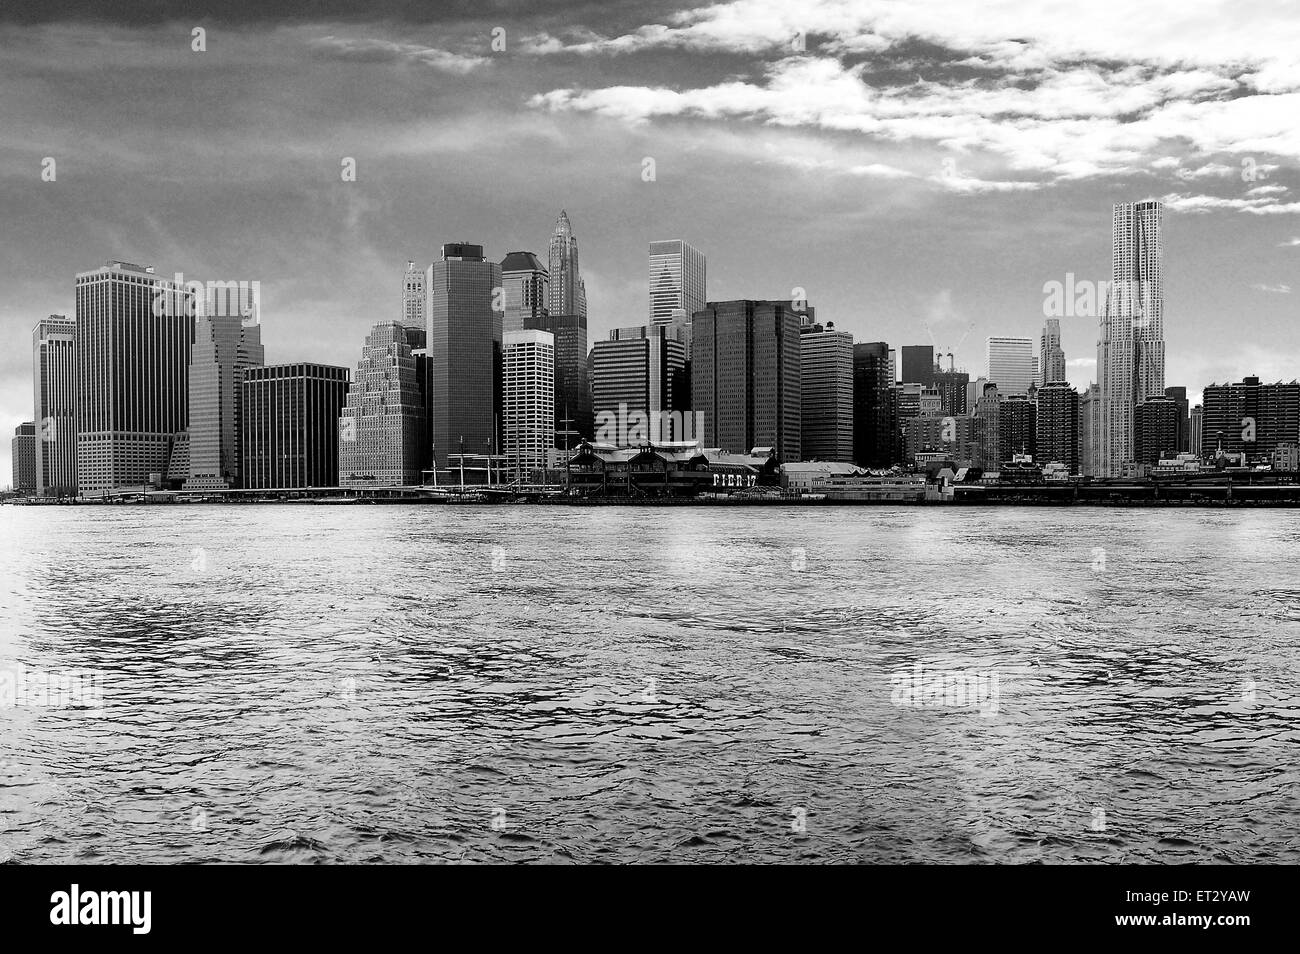 Looking for the best views of New York City this is iconic Manhattan skyline taken over the East River - USA Stock Photo